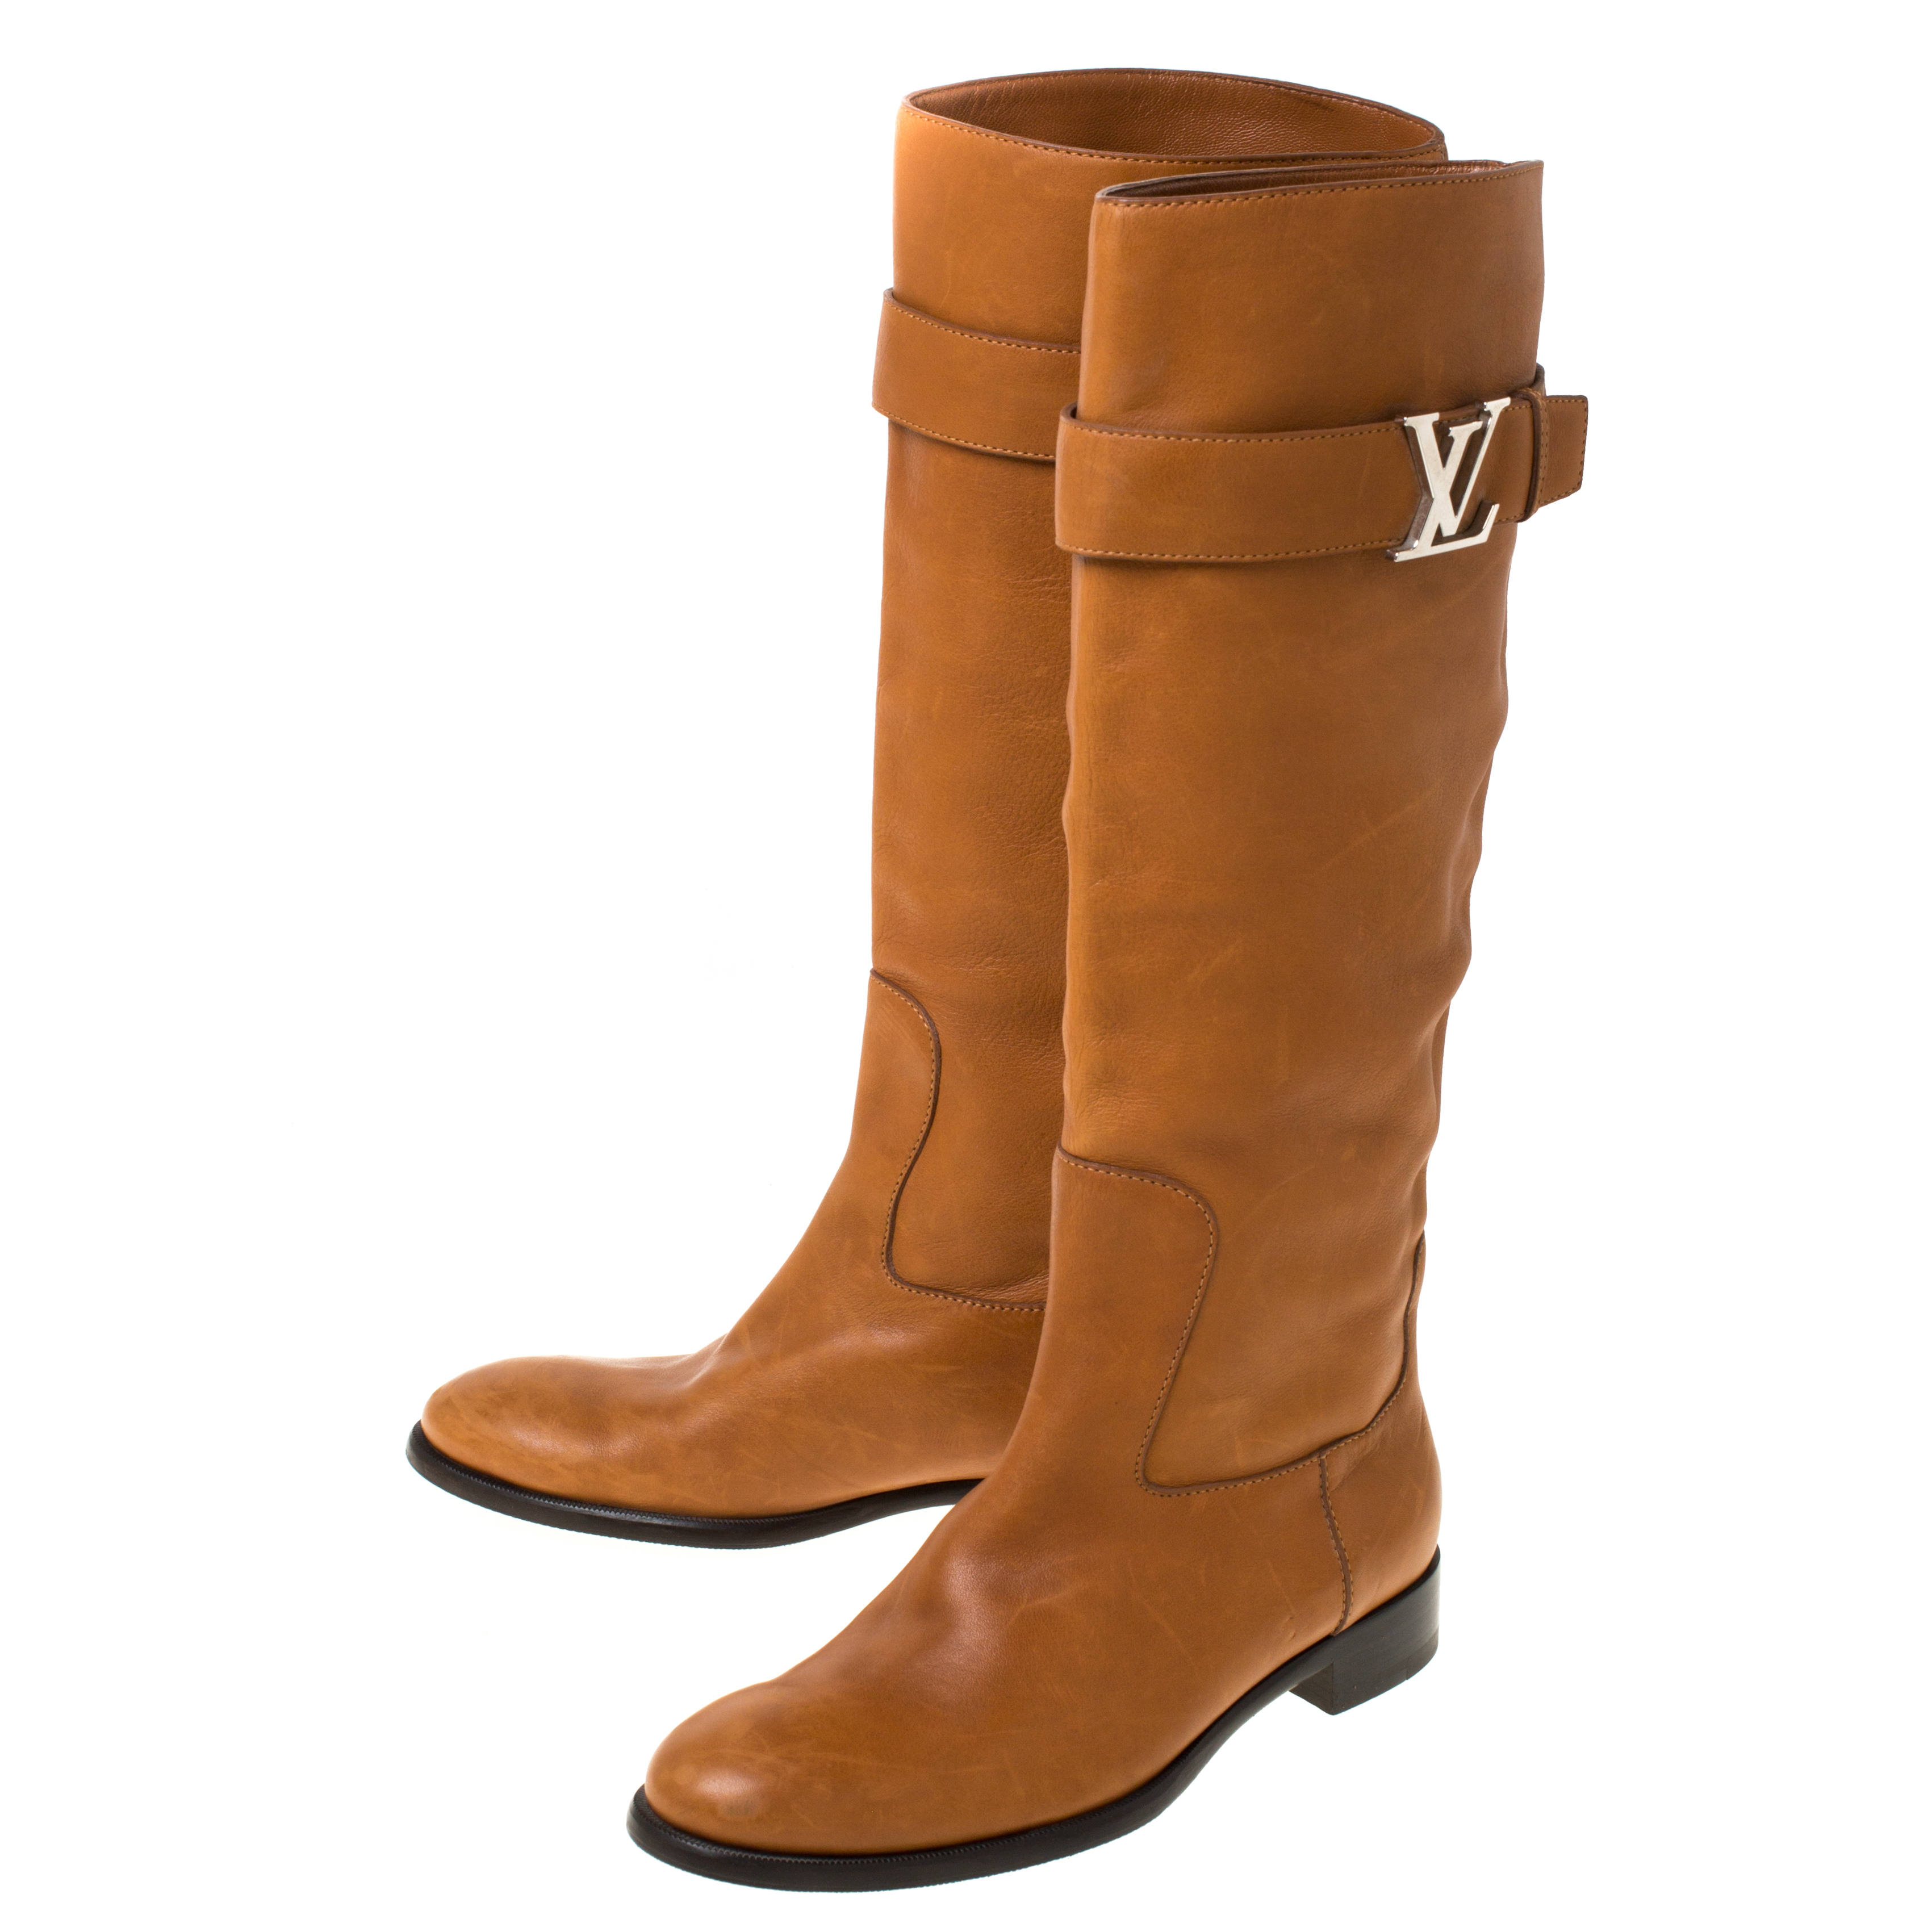 Louis Vuitton - Authenticated Héritage Boots - Leather Brown Plain for Women, Very Good Condition